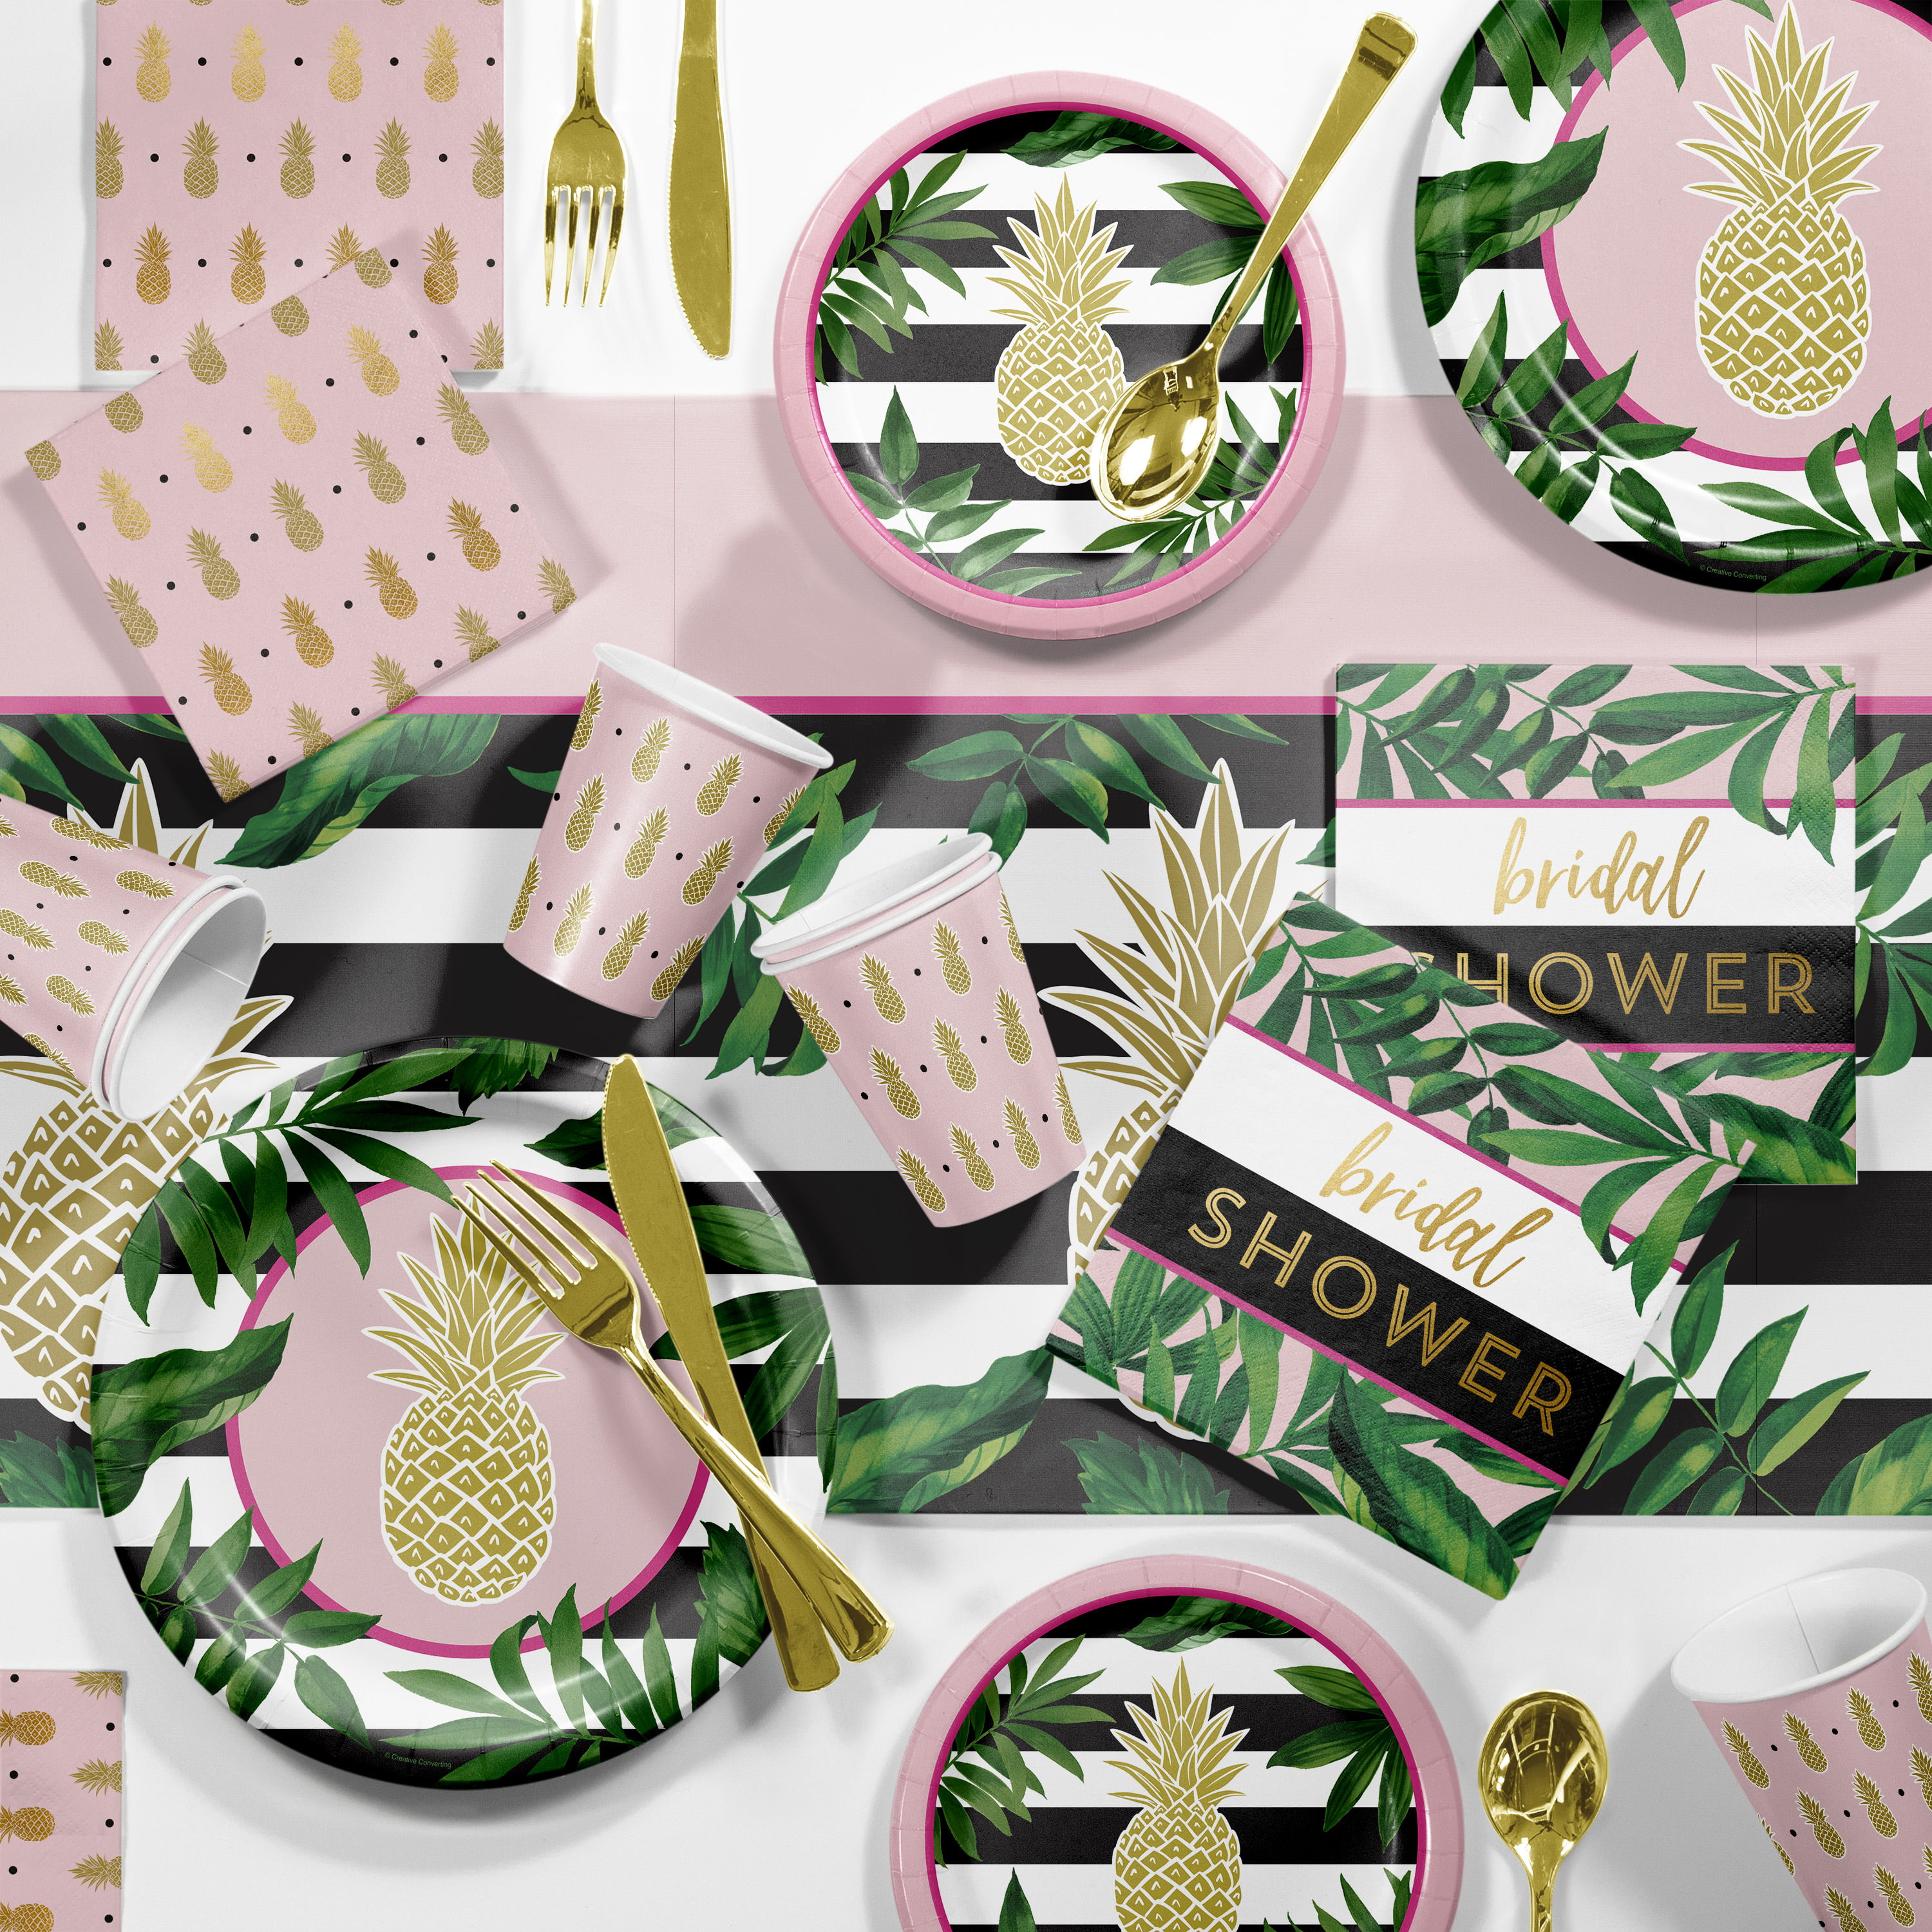 40 Personalized Tropical Pineapple Fans Wedding Bridal Shower Beach Party Favors 